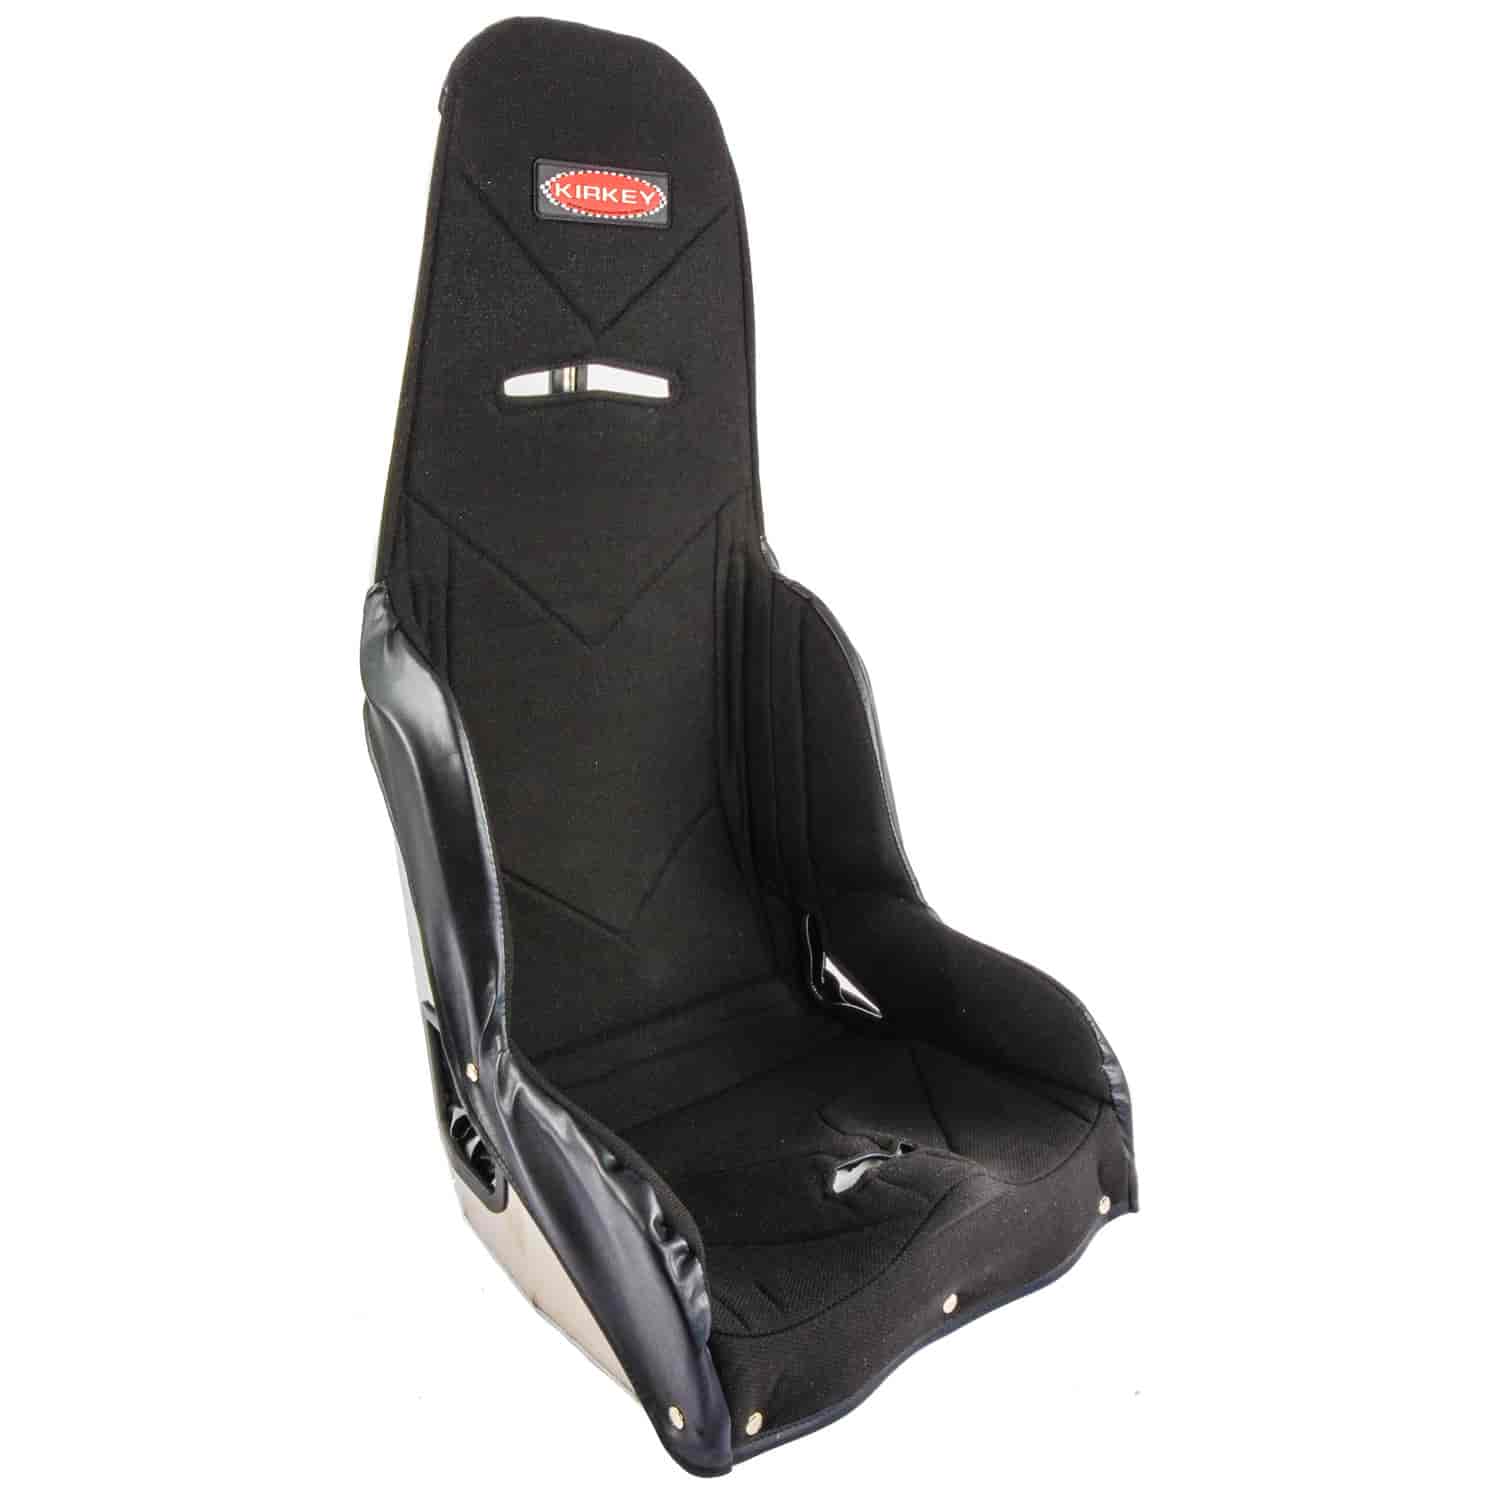 Pro Street Drag Seat Cover 18